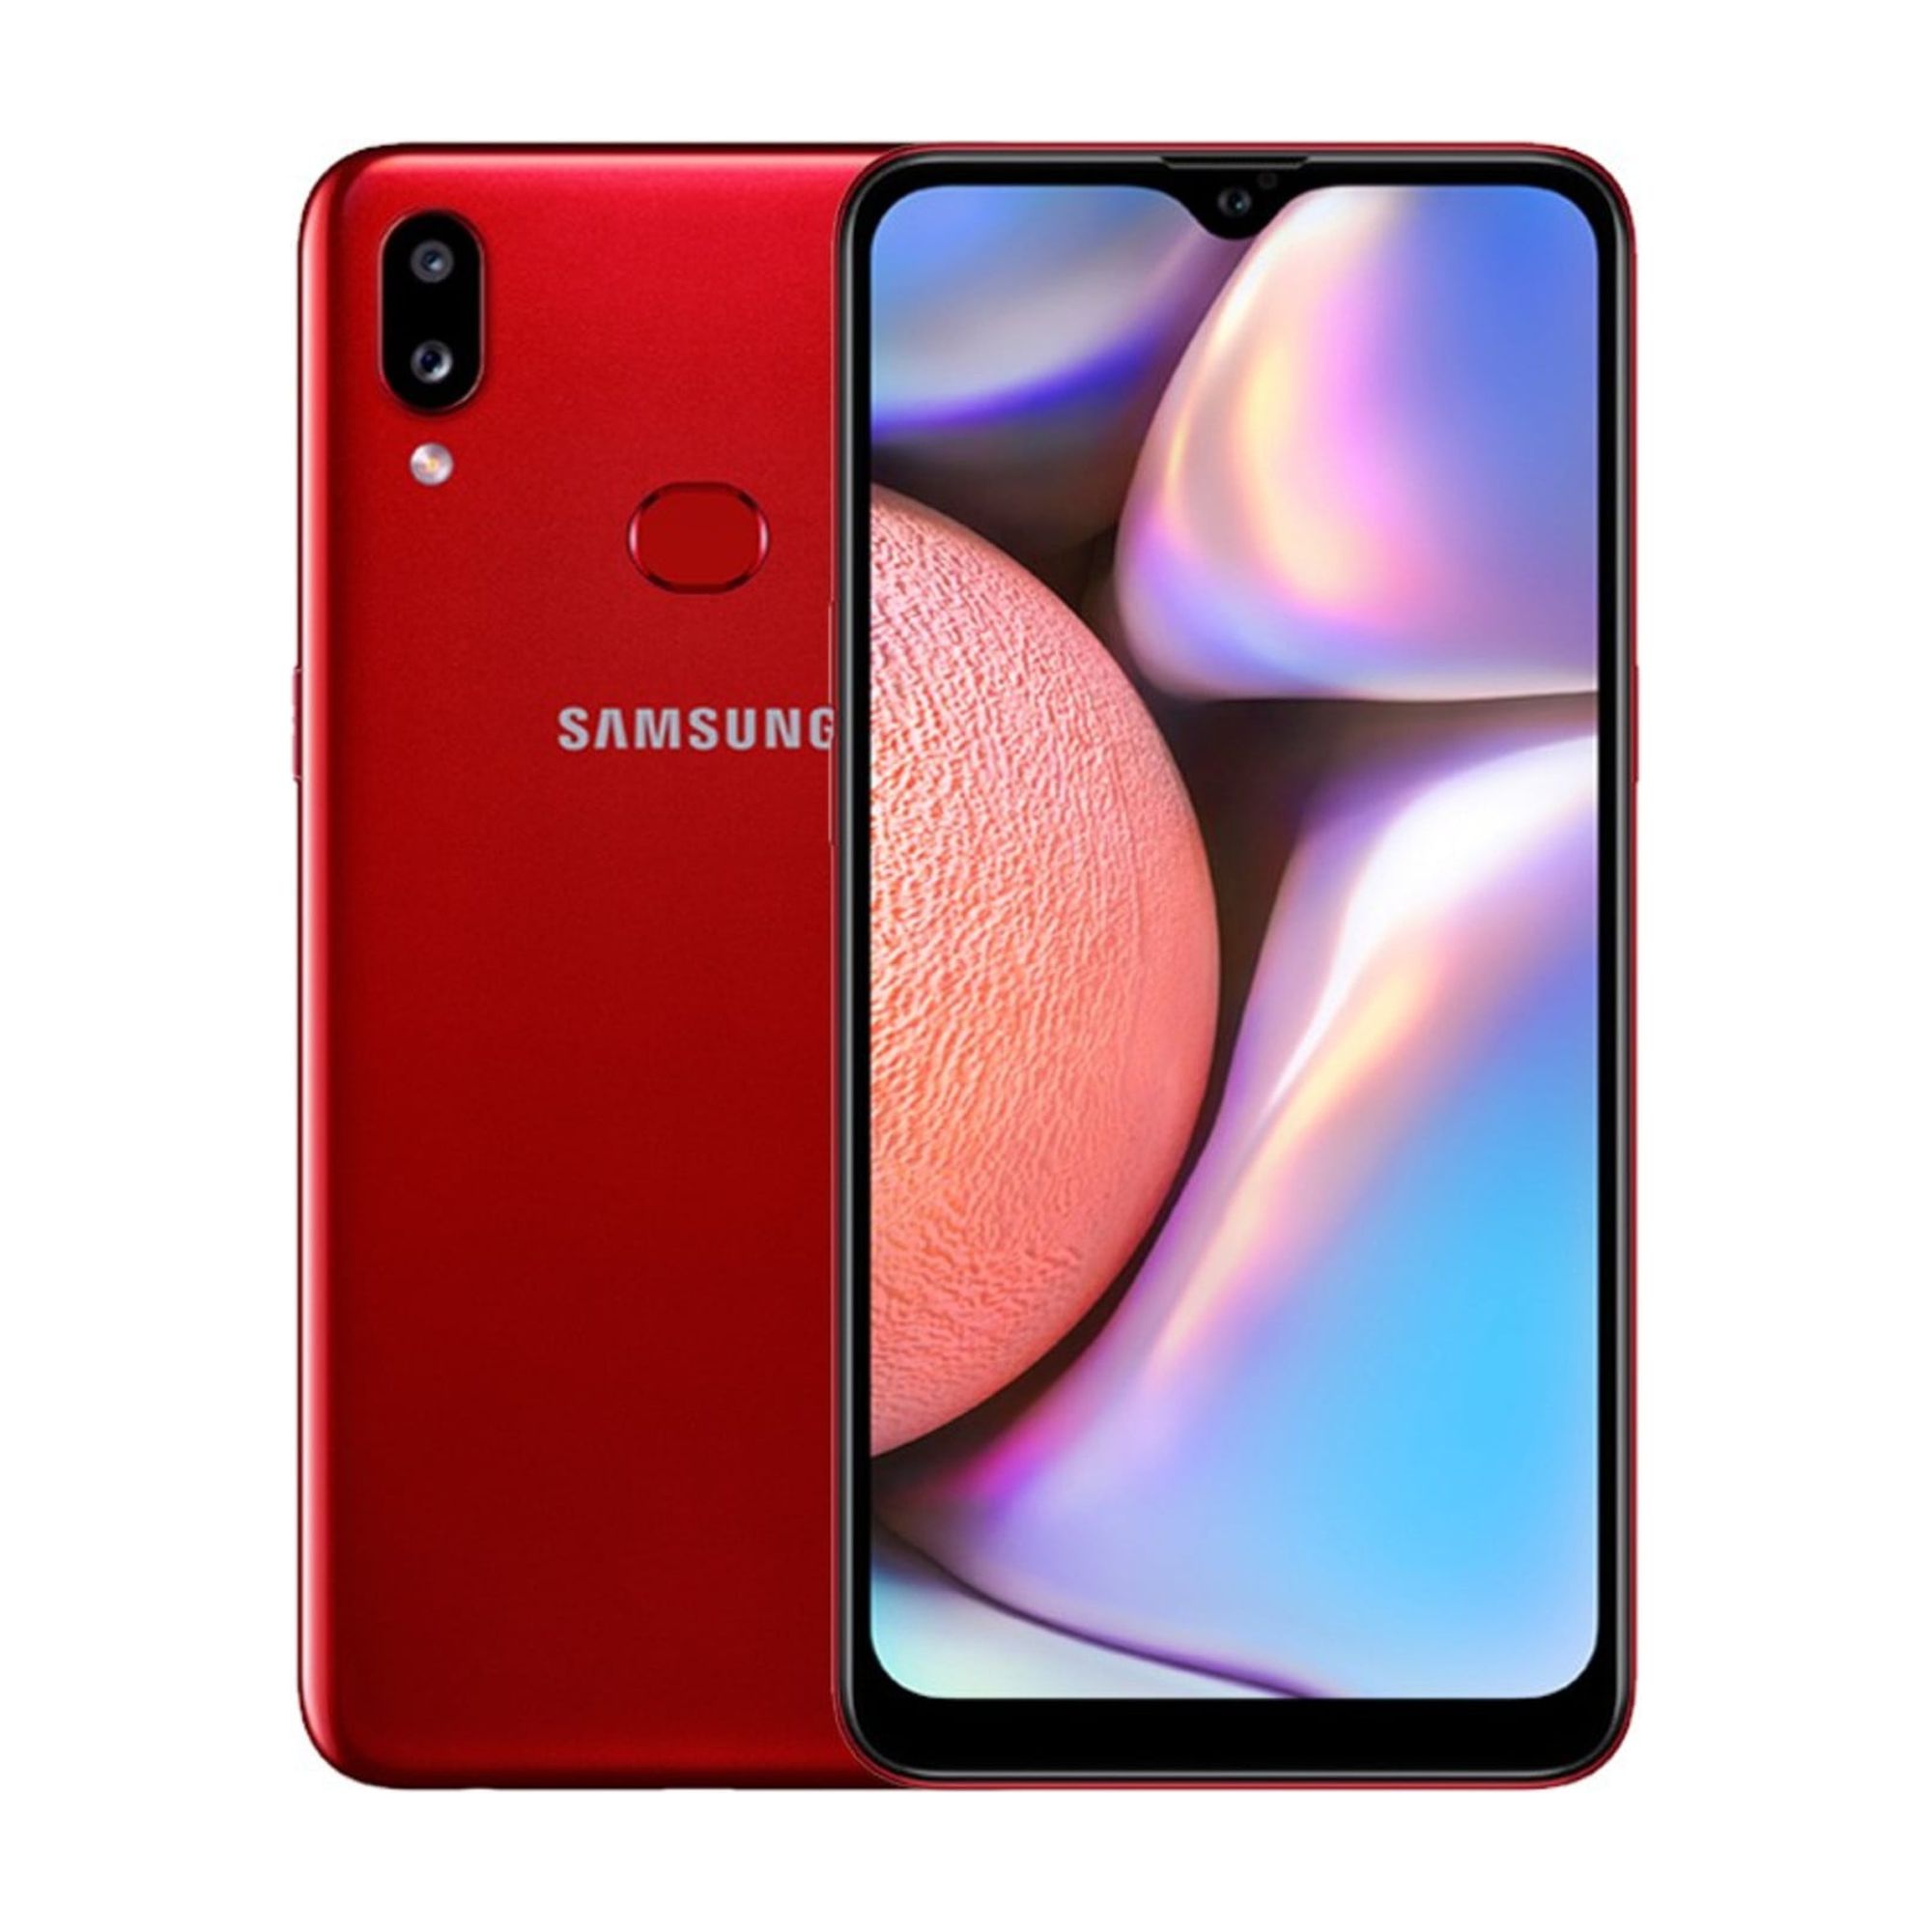 SAMSUNG Galaxy A10S A107M, 32GB, GSM Unlocked Dual SIM (International Variant/US Compatible LTE) – Red - image 1 of 4